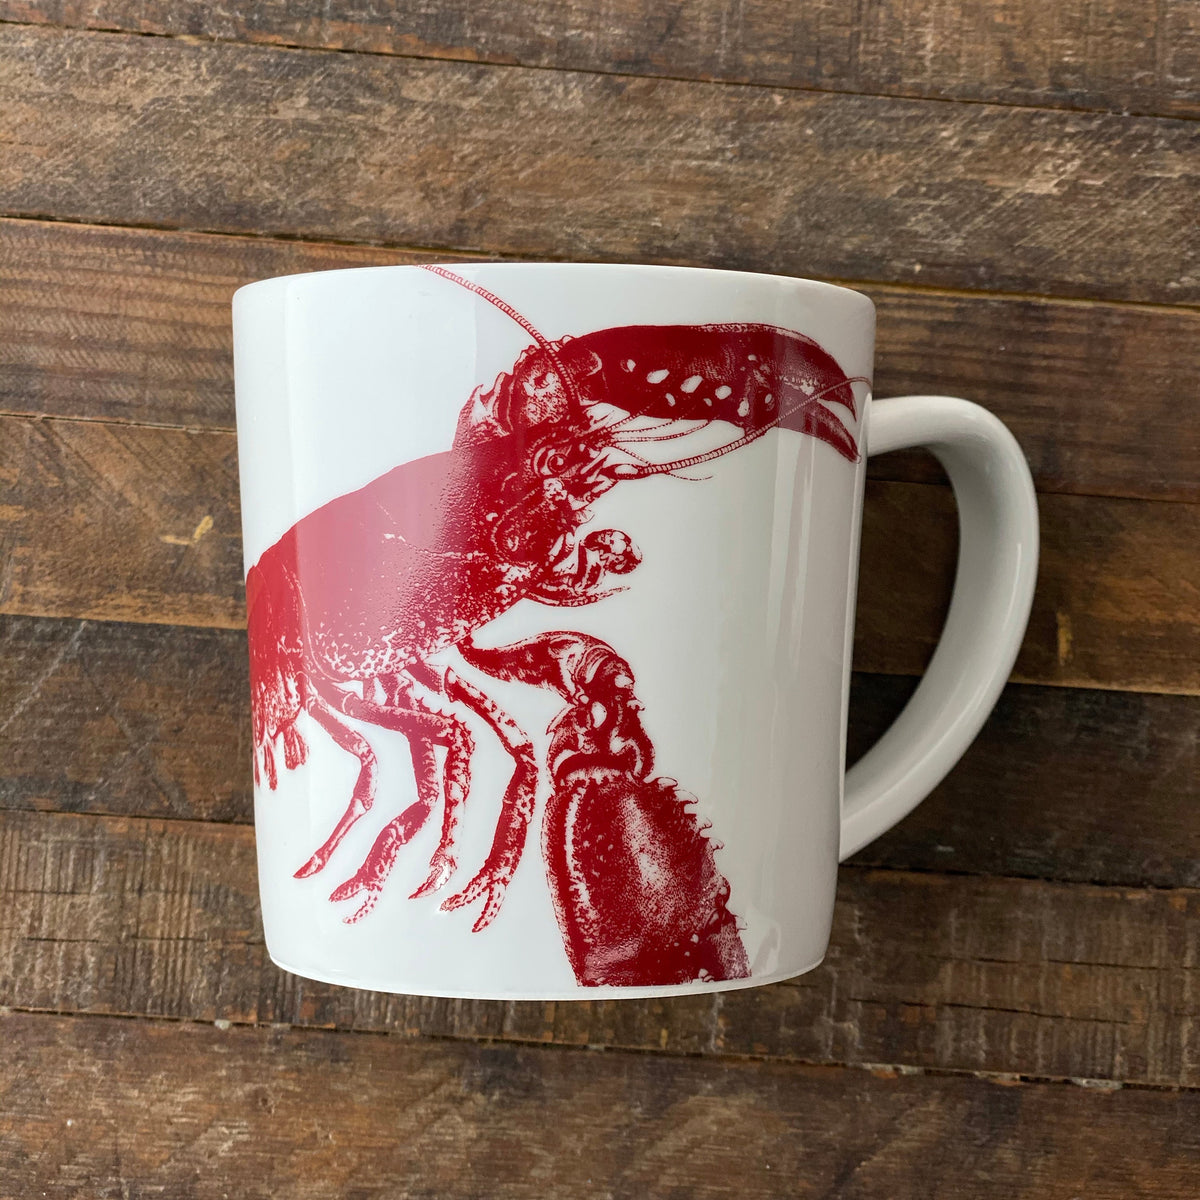 Lobster Red Mug by Caskata Artisanal Home, crafted from high-fired porcelain, featuring a striking red lobster design and placed on a wooden surface, evoking a charming seaside style.